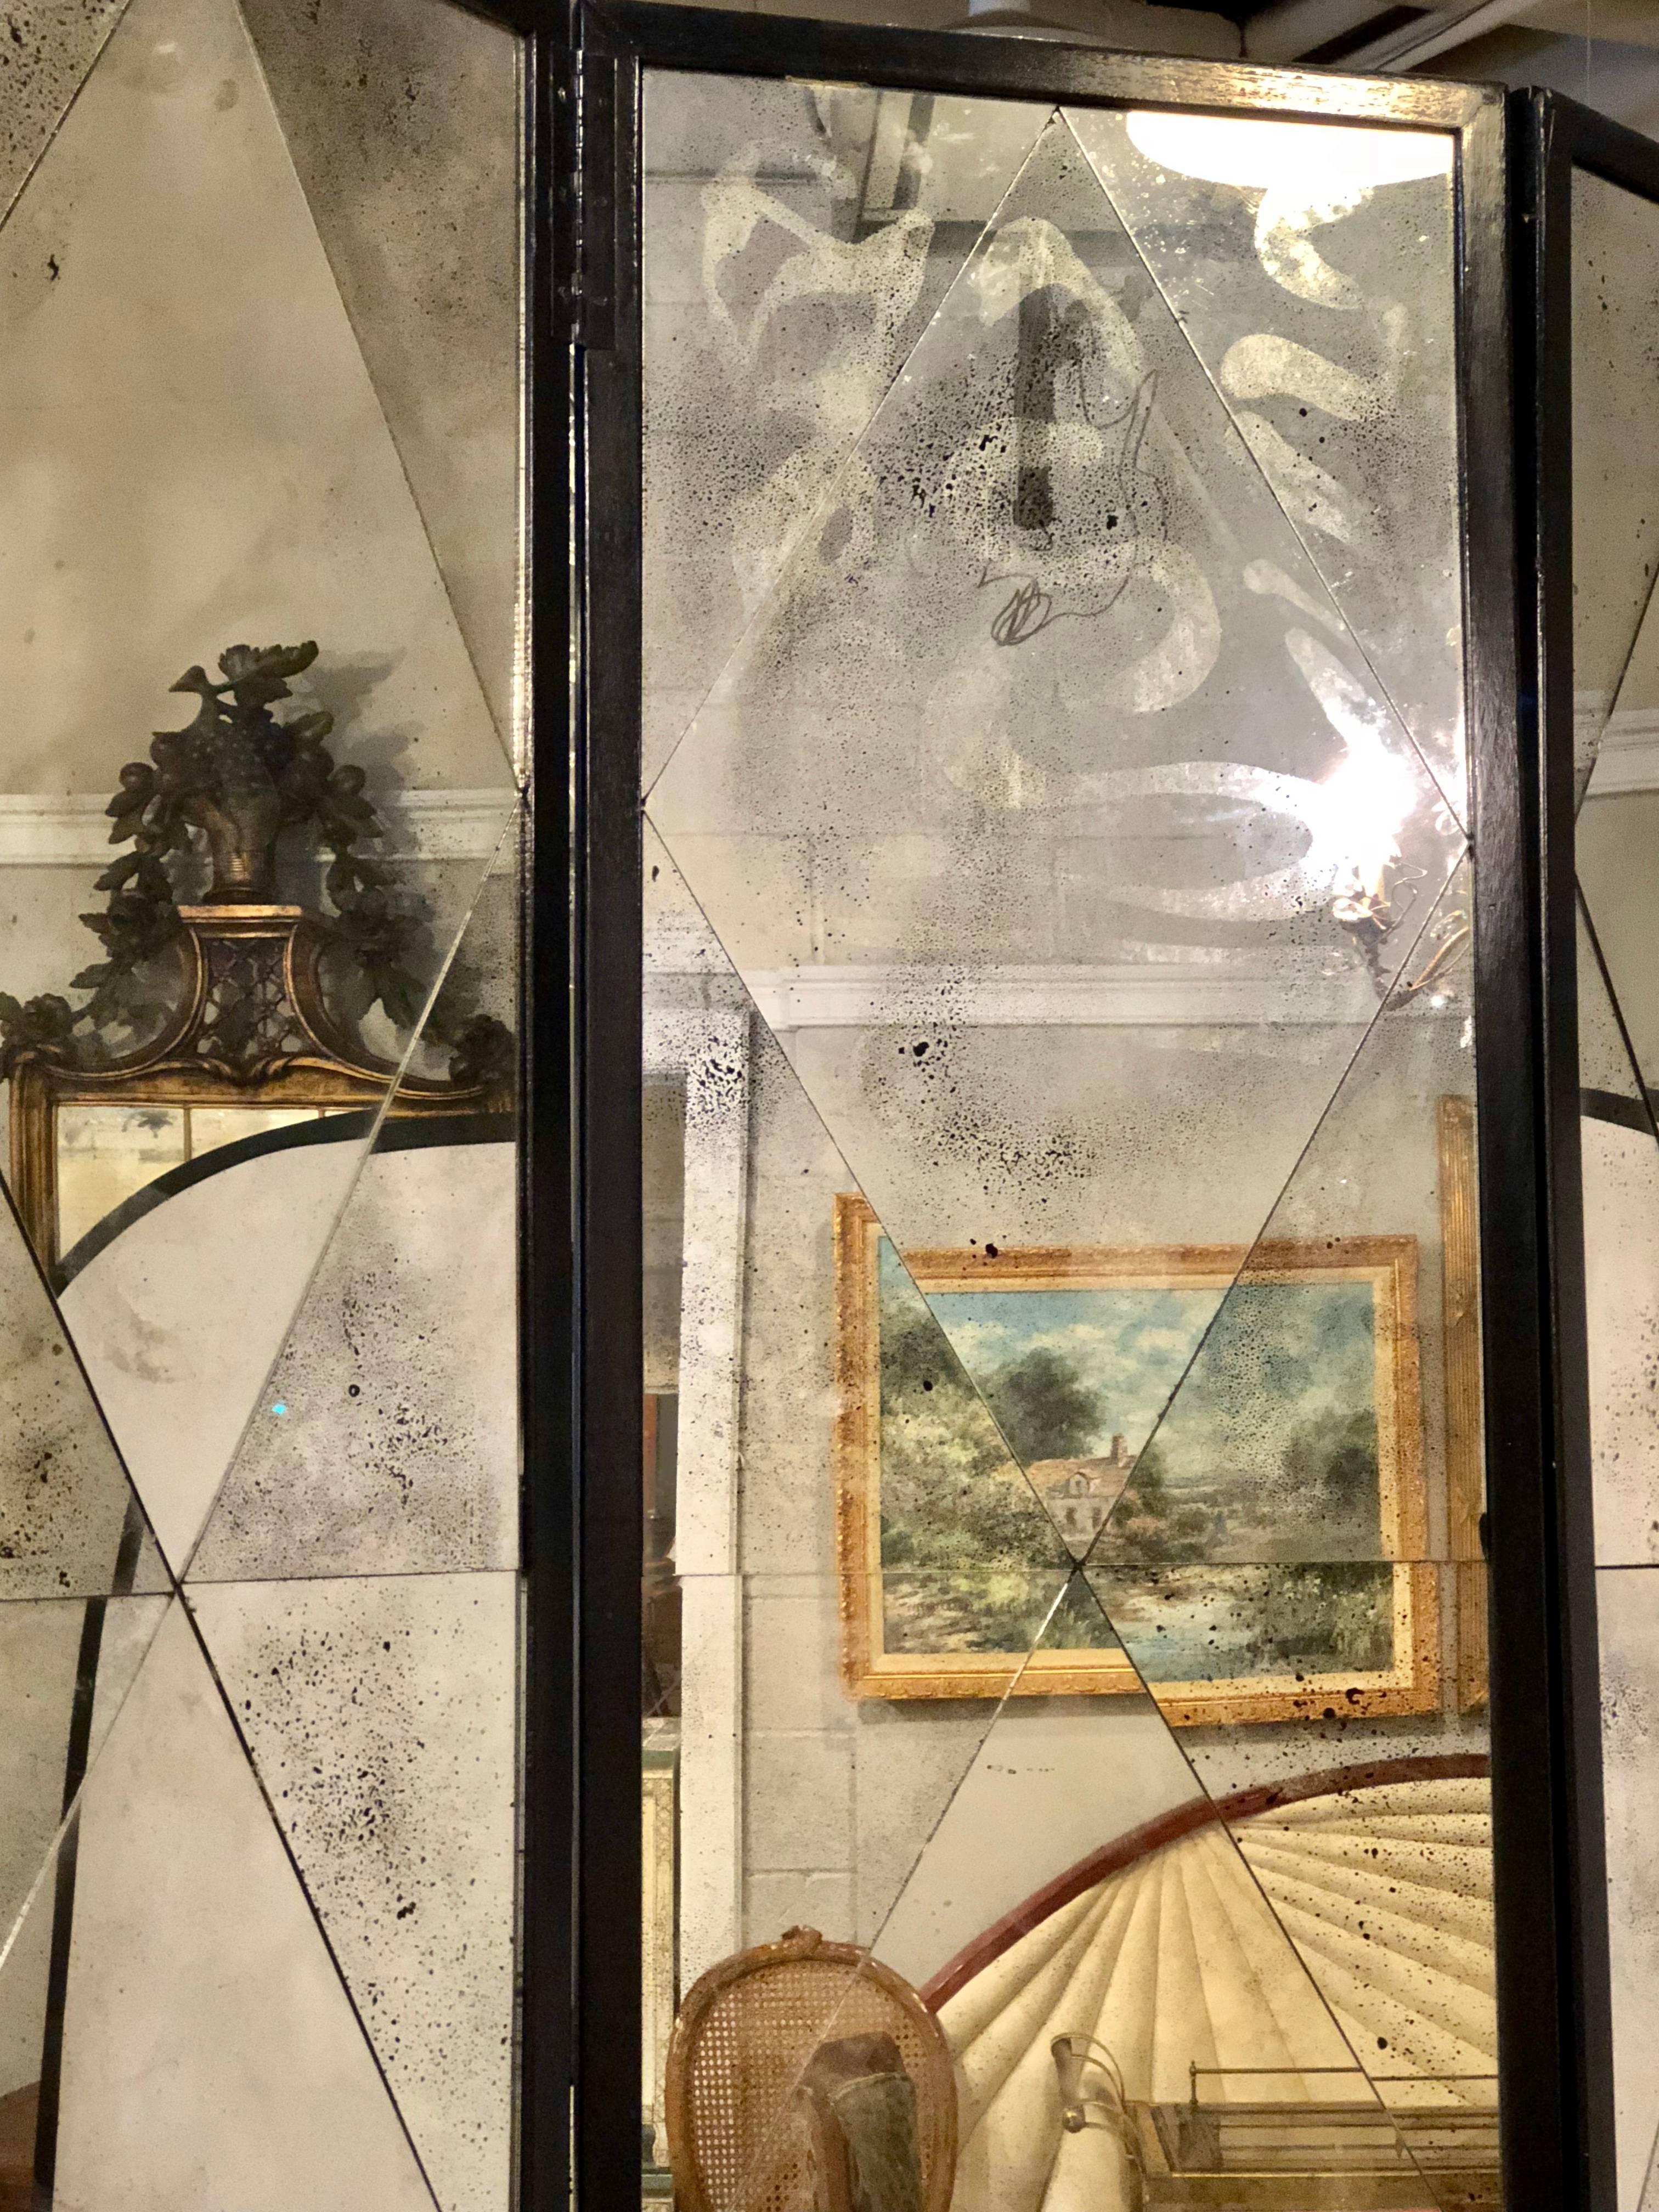 A Hollywood Regency style four panel double sided floor screen or room divider having a distressed diamond mirror design. There is a break/long scratch on one of the mirrored panels and a couple of the panels have been replaced as is evident in the